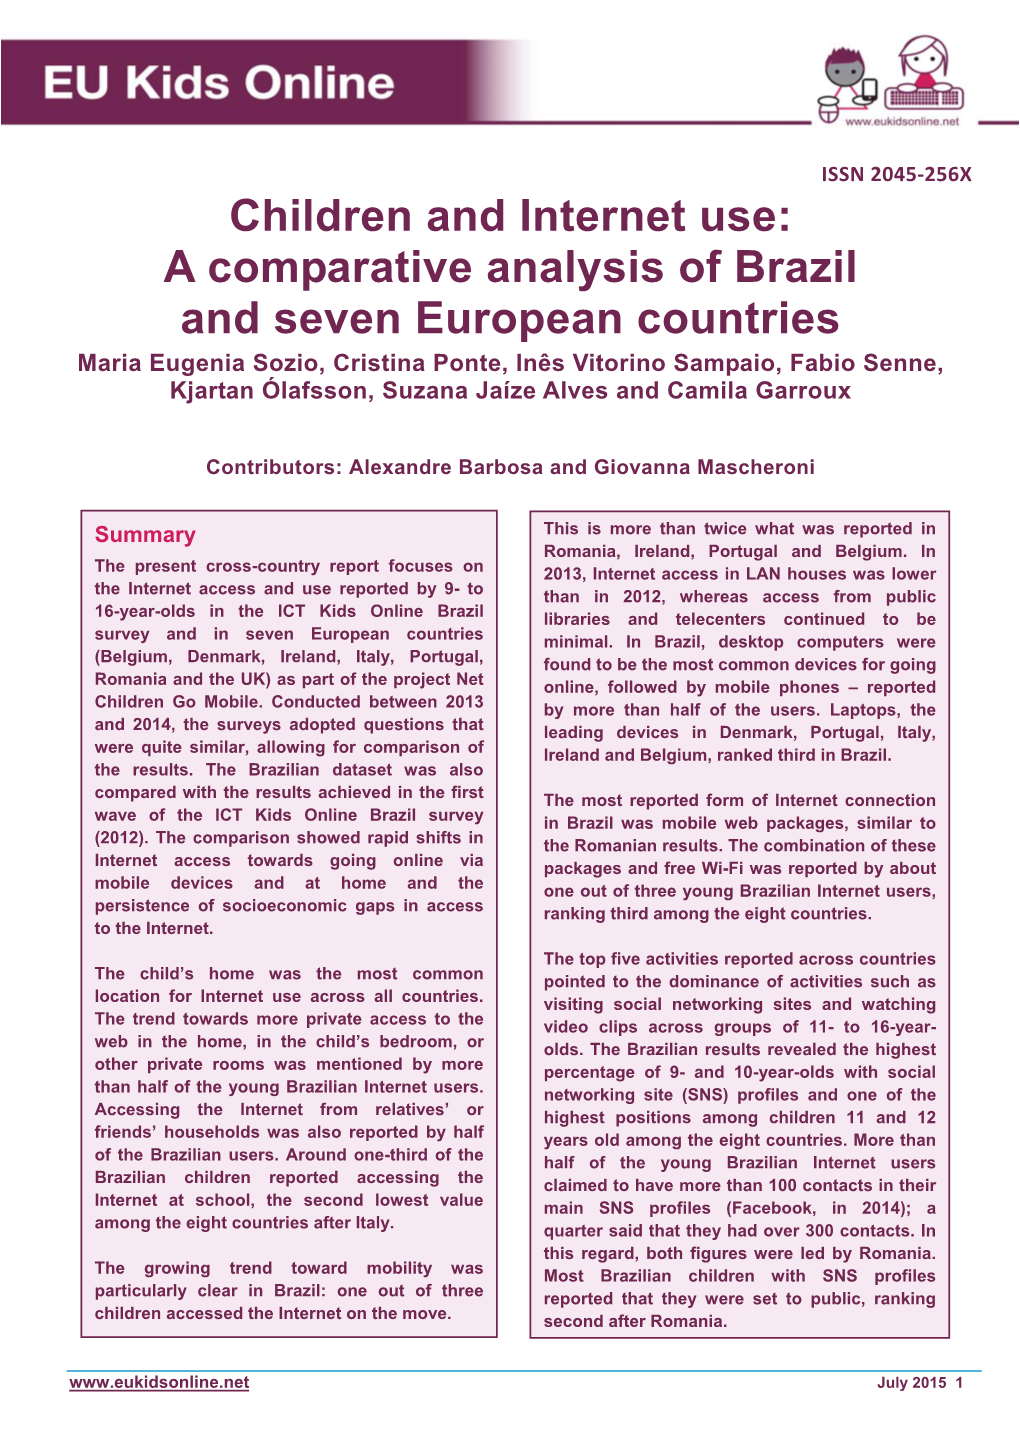 A Comparative Analysis of Brazil and Seven European Countries